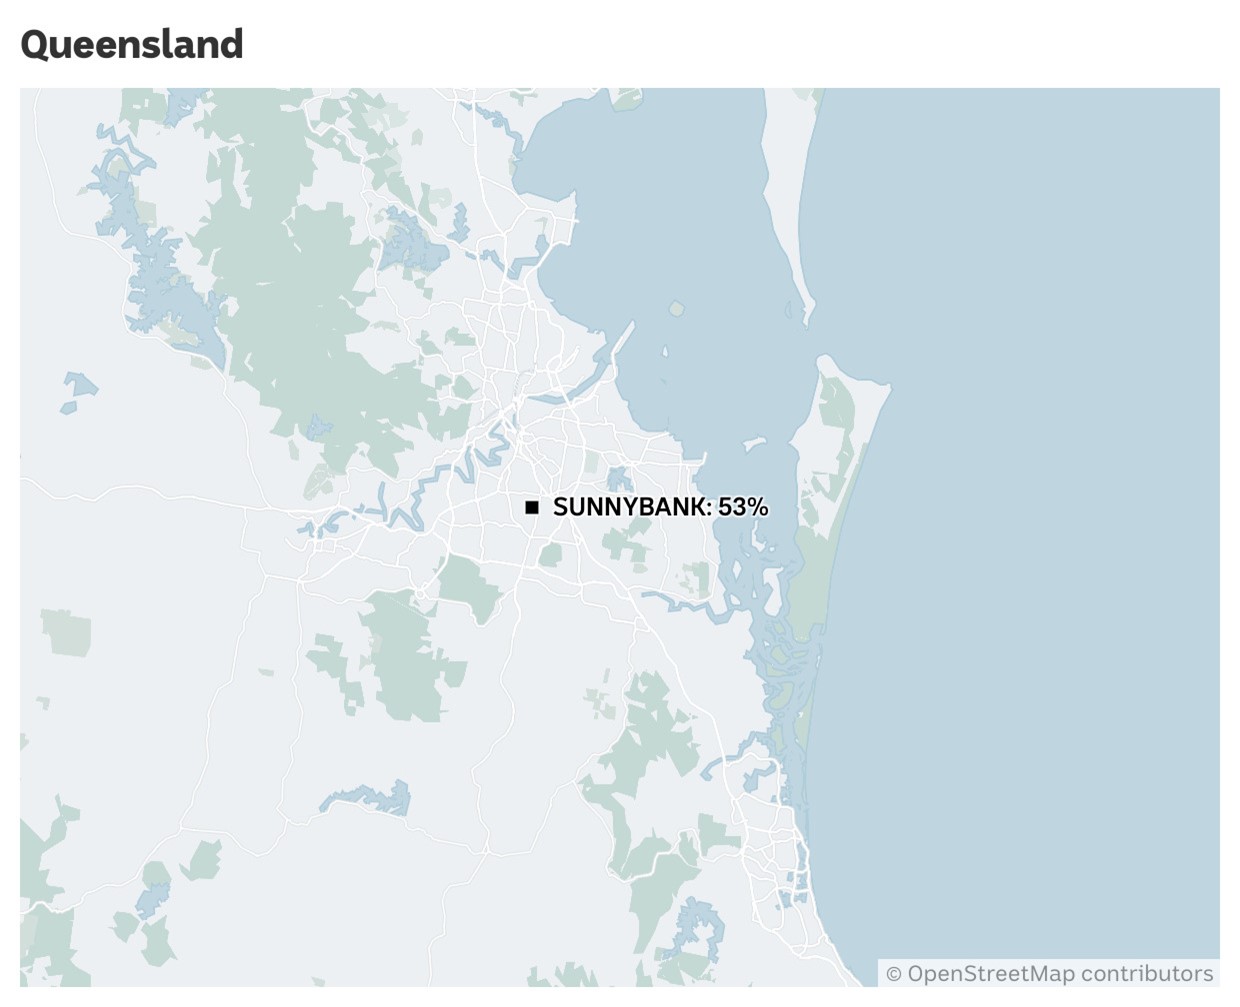 A map shows one culturally diverse area in Queensland.